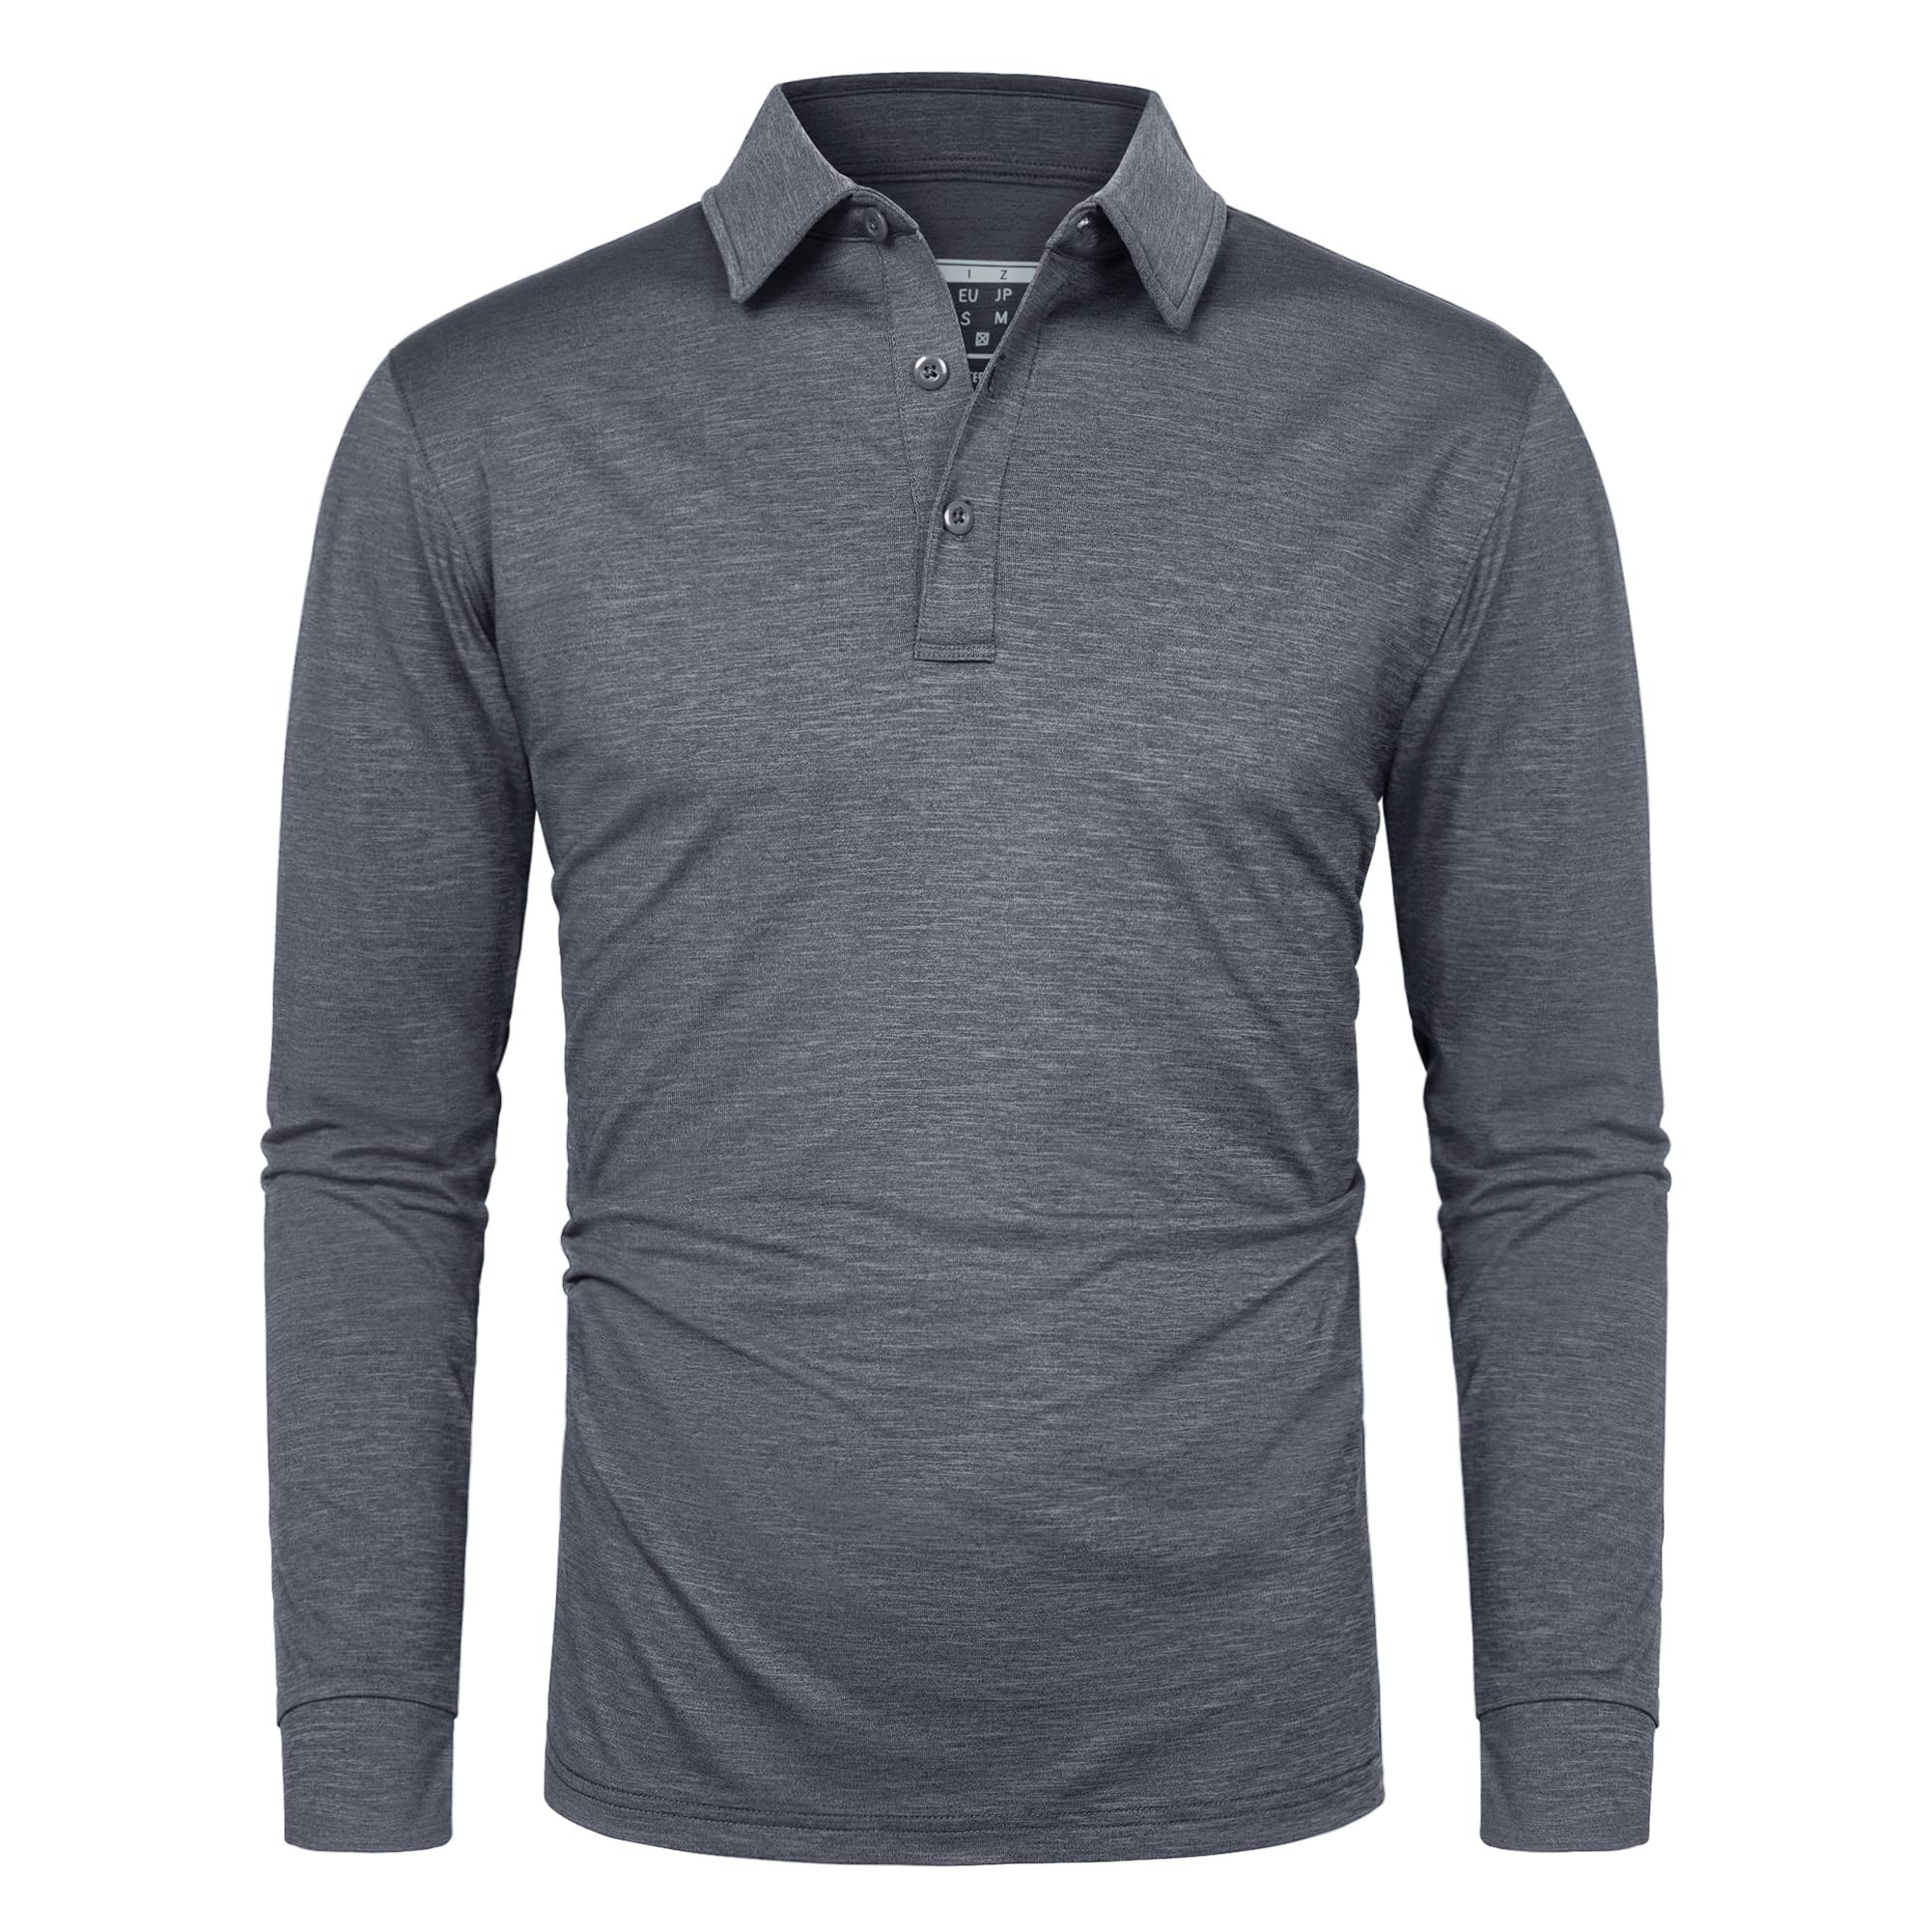 Soft Polyester Golf Polo Long Sleeve Shirt in light grey